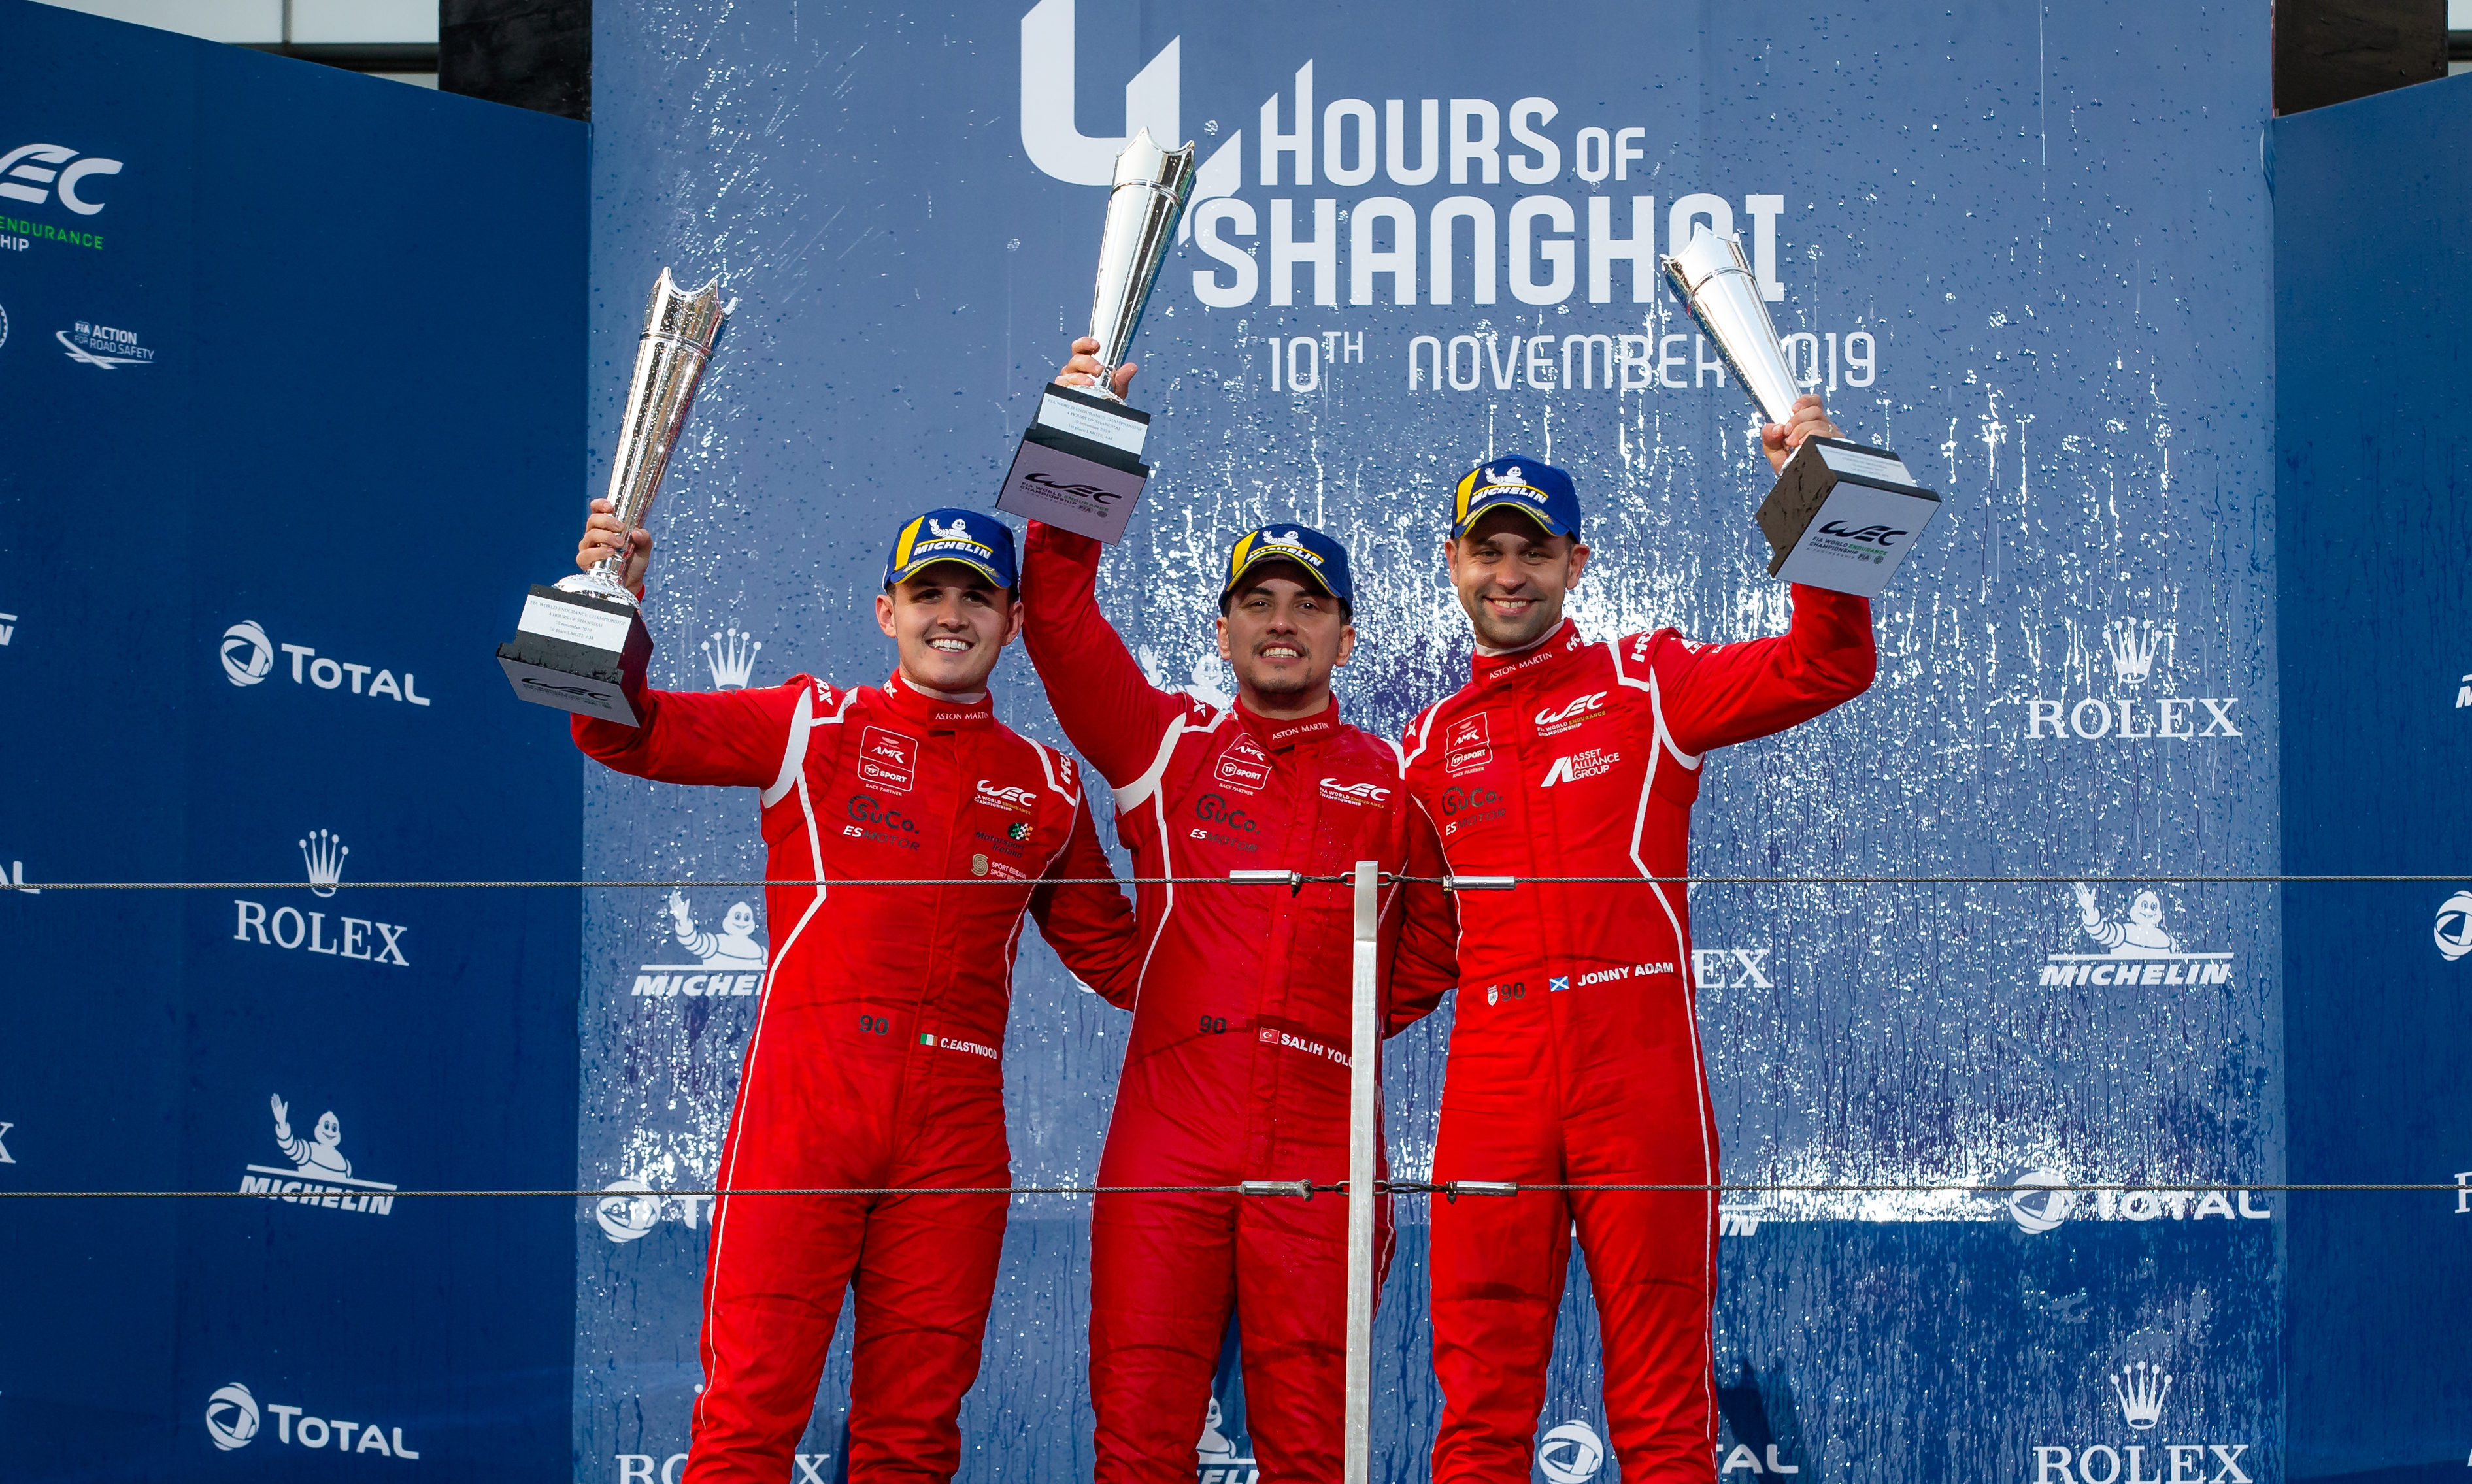 Jonny Adam (right)would love a repeat of the Shanghai WEC win with TF Sport teammates Eastwood and Yolic.